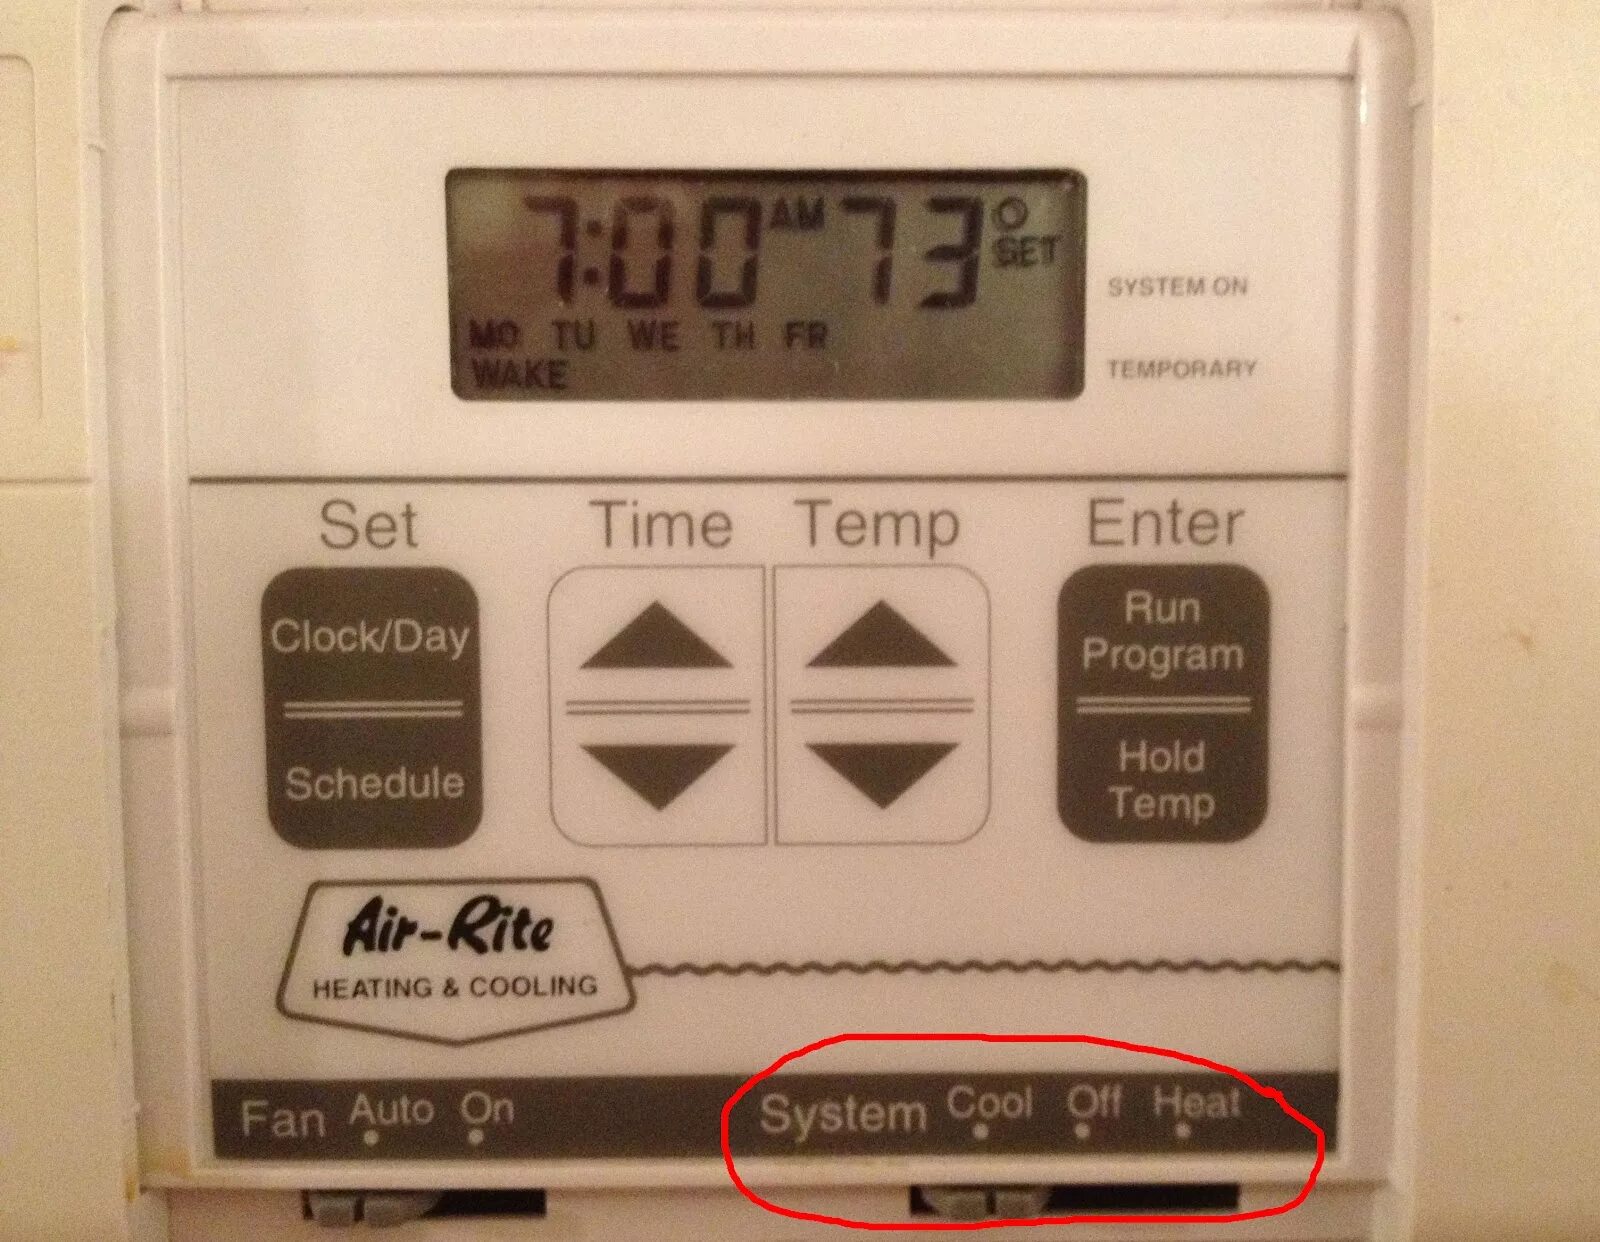 Honeywell thermostat old. How to Set Honeywell thermostat Schedule. Honeywell thermostat how to operate Run and hold. Timer is Set for fuel Heater -11. System temp